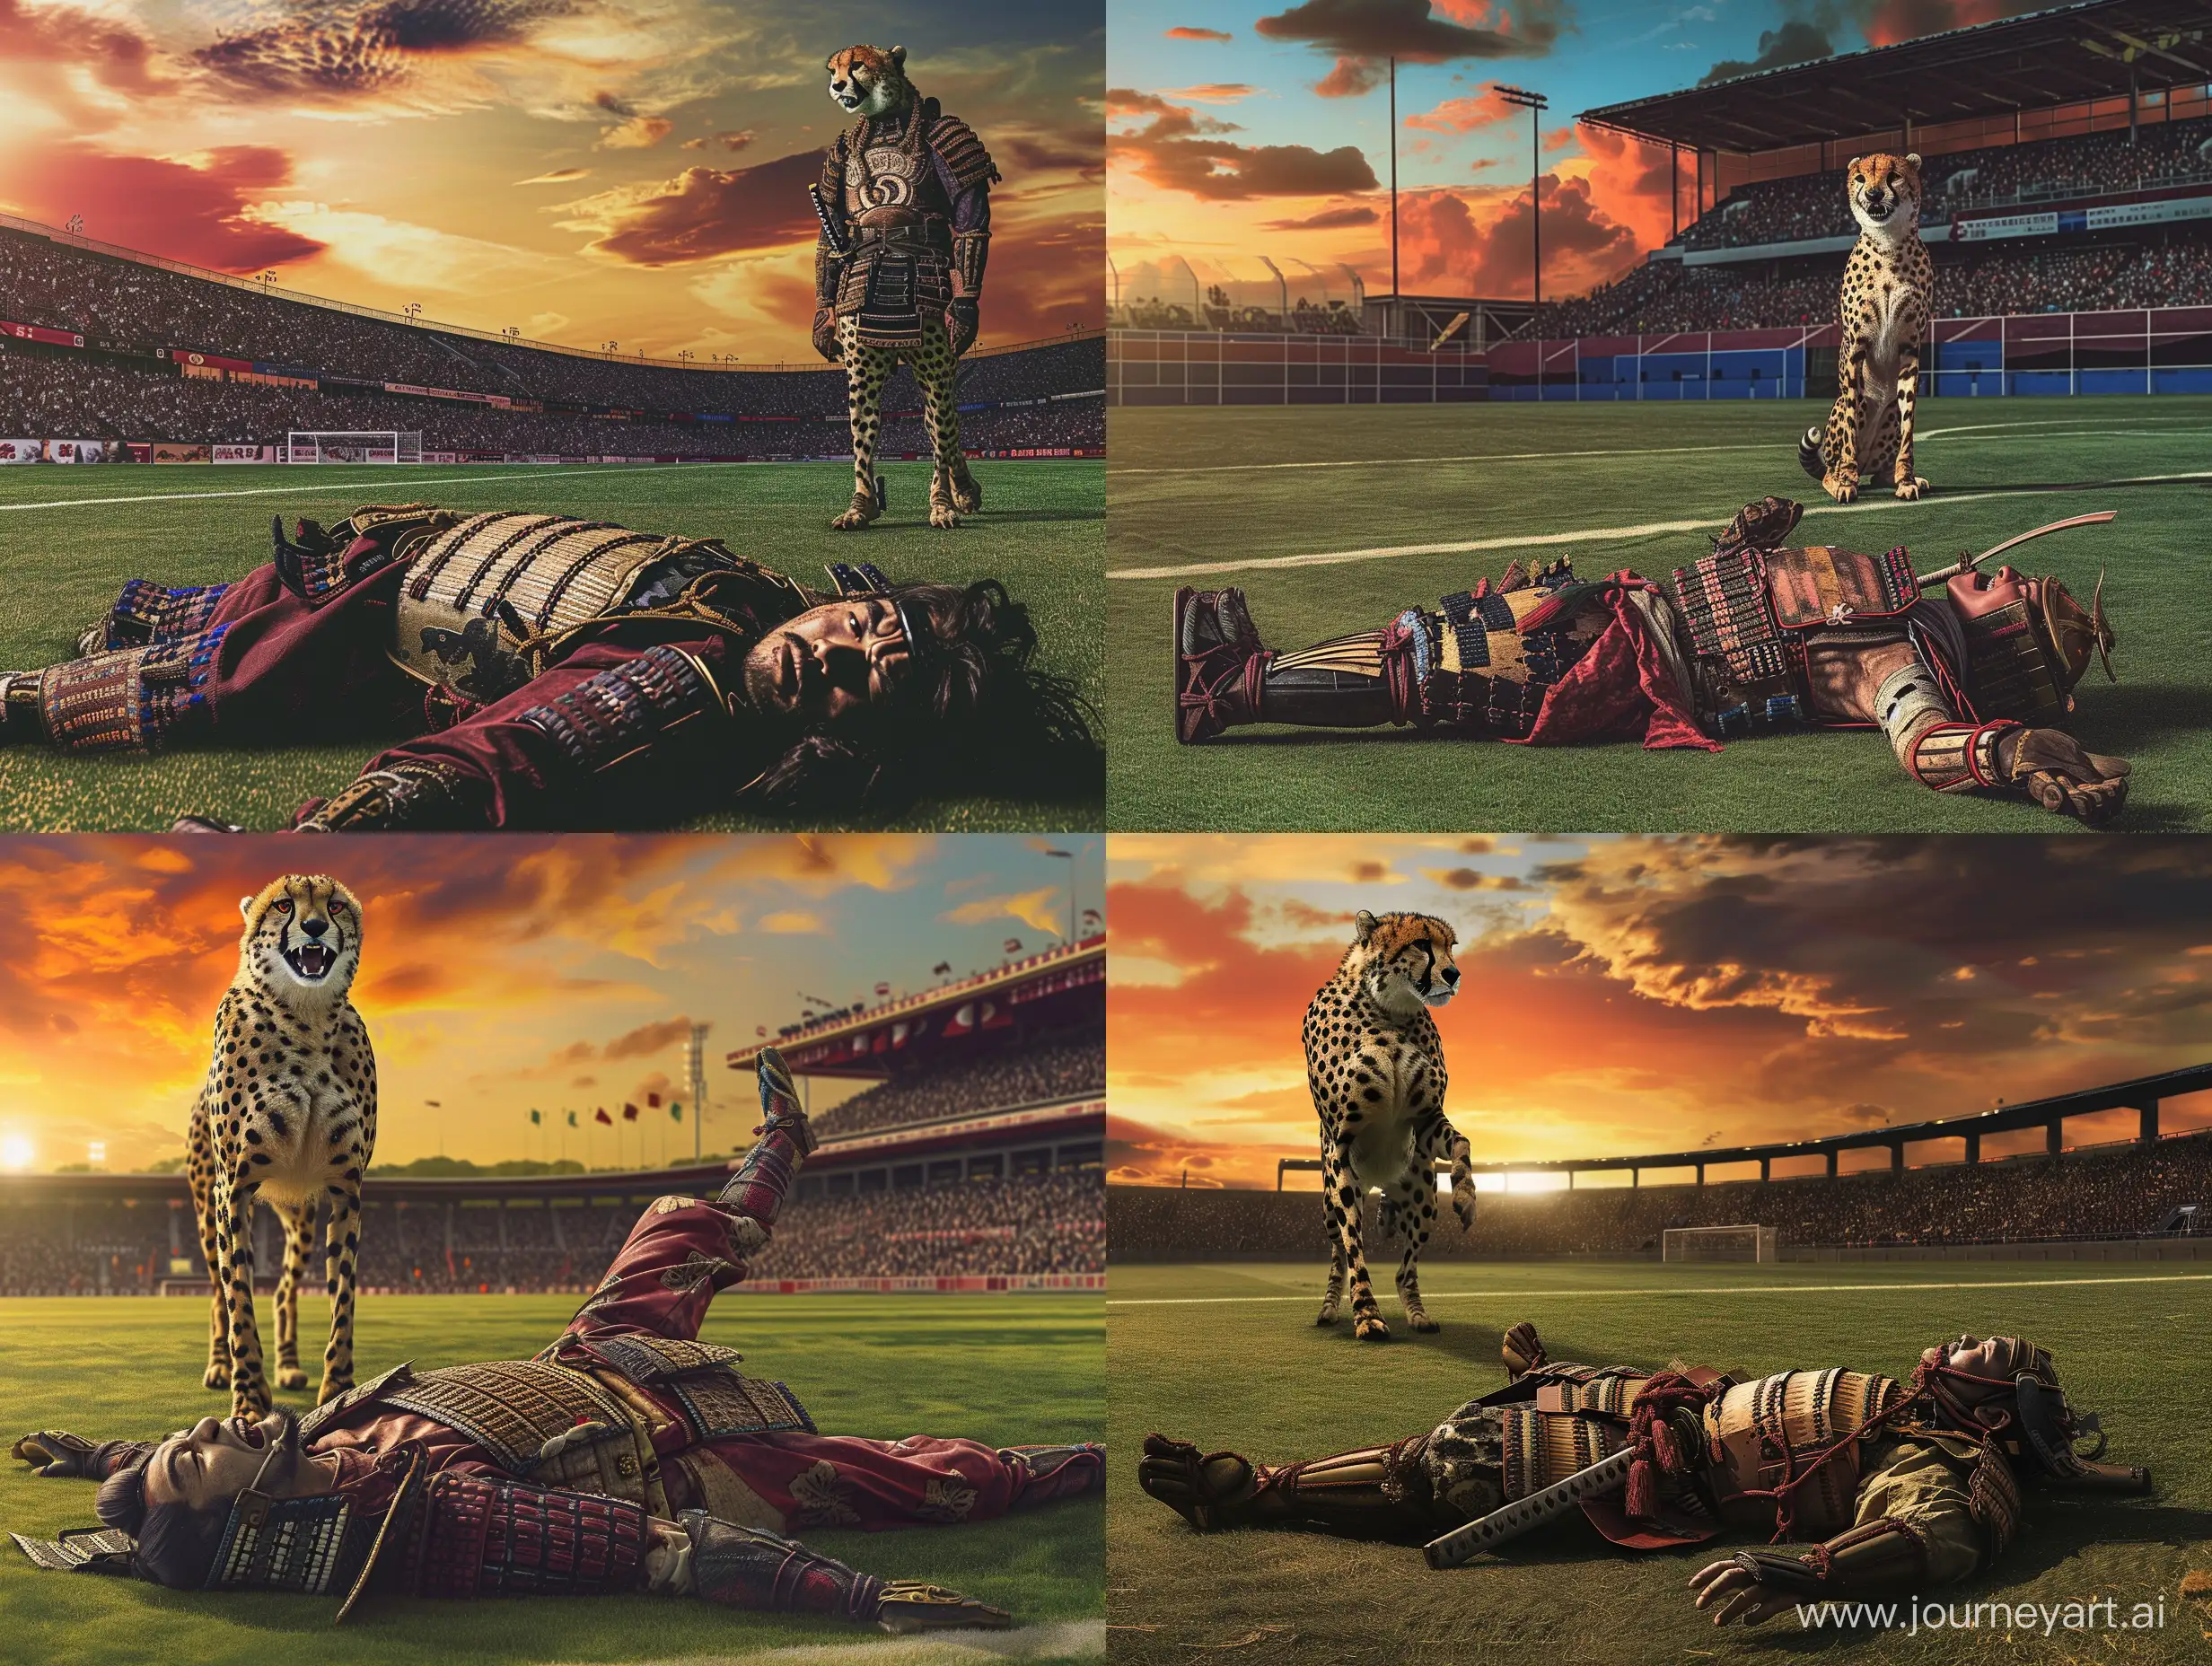 a defeated Japanese samurai lying on a soccer field, showing clear signs of a fierce battle with a Persian cheetah, juxtaposing elements of ancient armor and modern sportswear, realistic imagery, dramatic sunset lighting casting long shadows, intense facial expressions of the samurai capturing the moment of defeat, the imposing figure of the cheetah standing victorious in the background, a stunned crowd in the stands